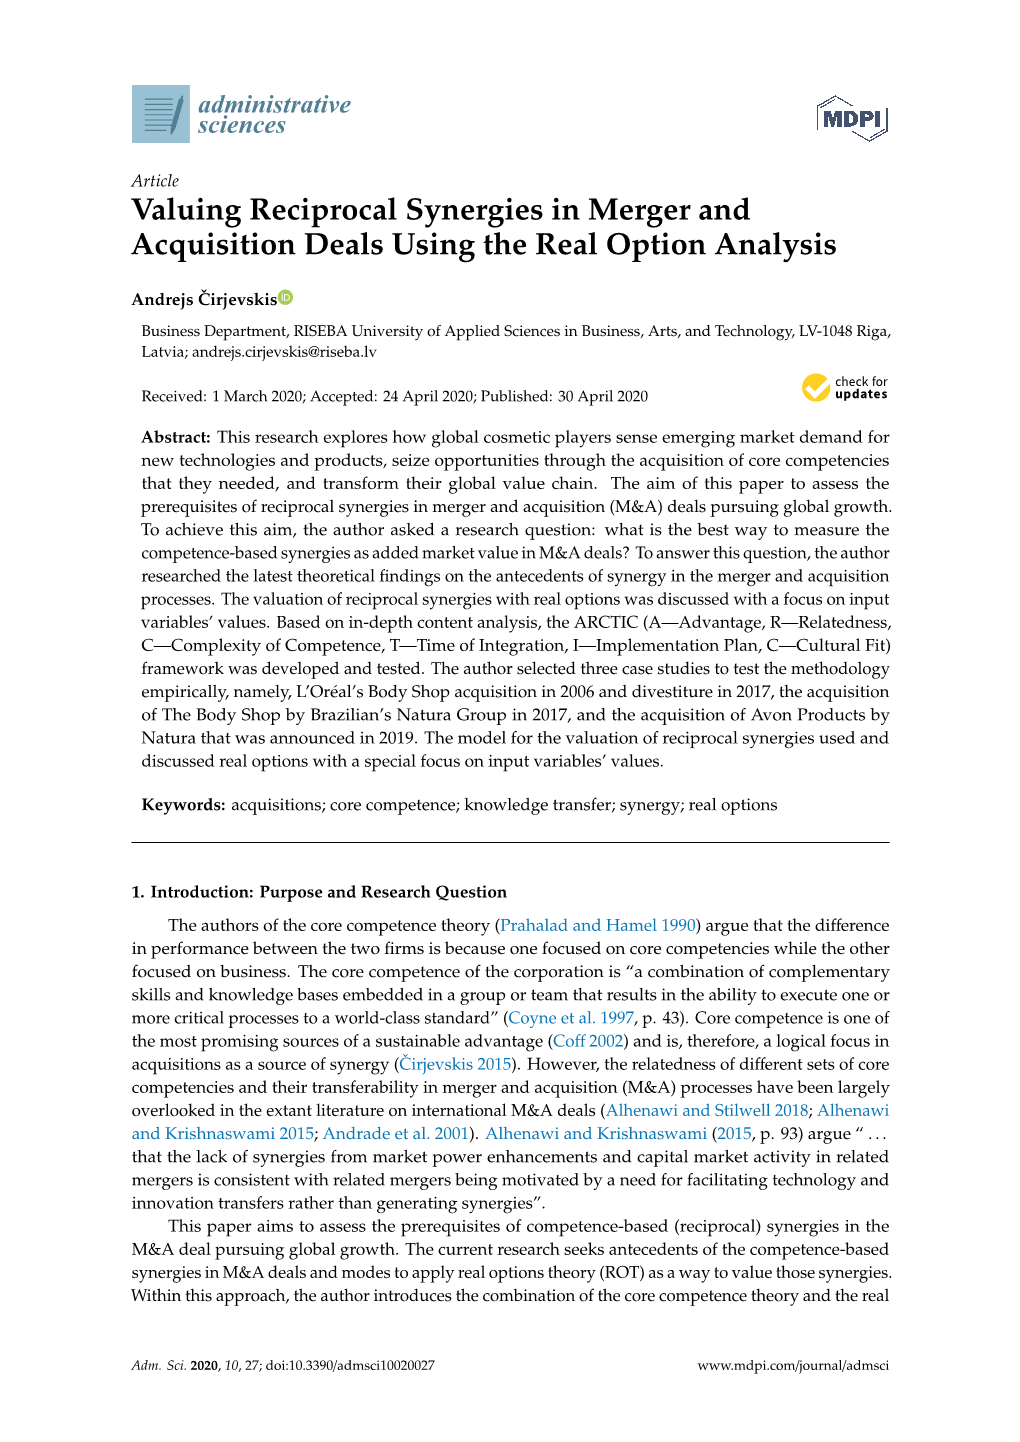 Valuing Reciprocal Synergies in Merger and Acquisition Deals Using the Real Option Analysis